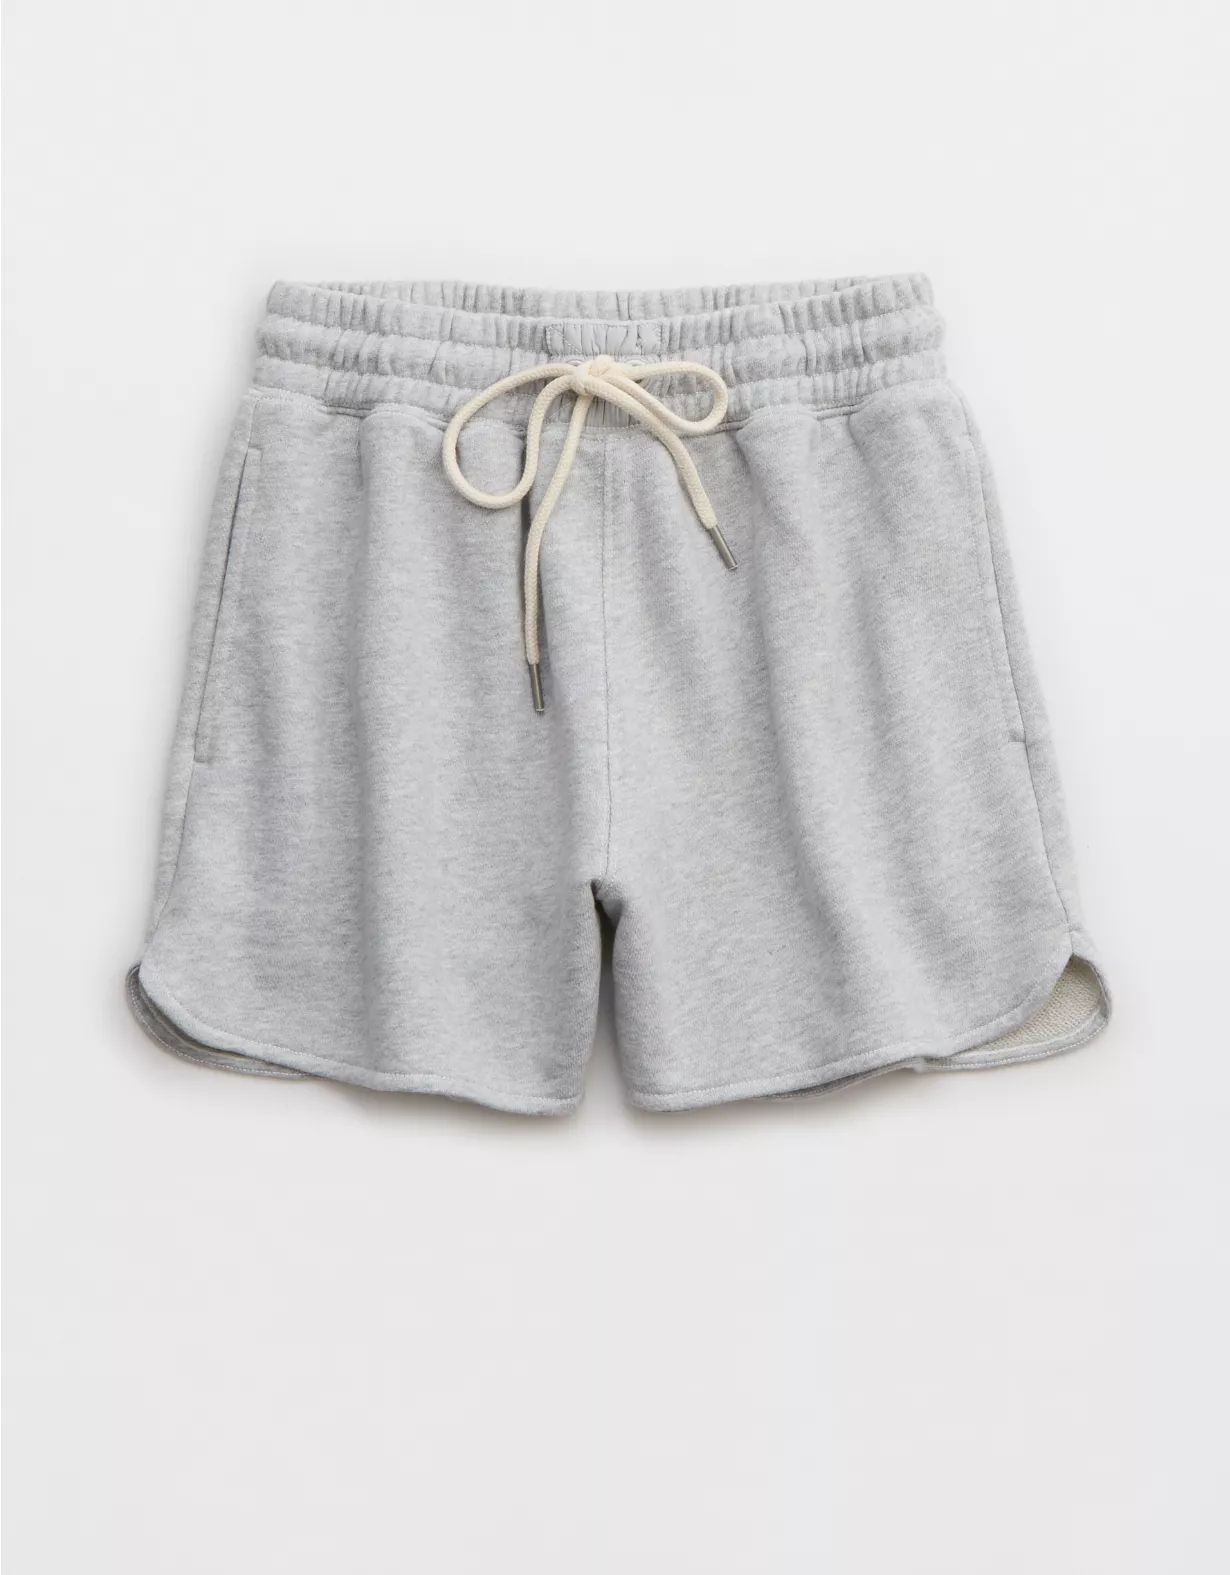 Aerie High Waisted REAL Short | Aerie